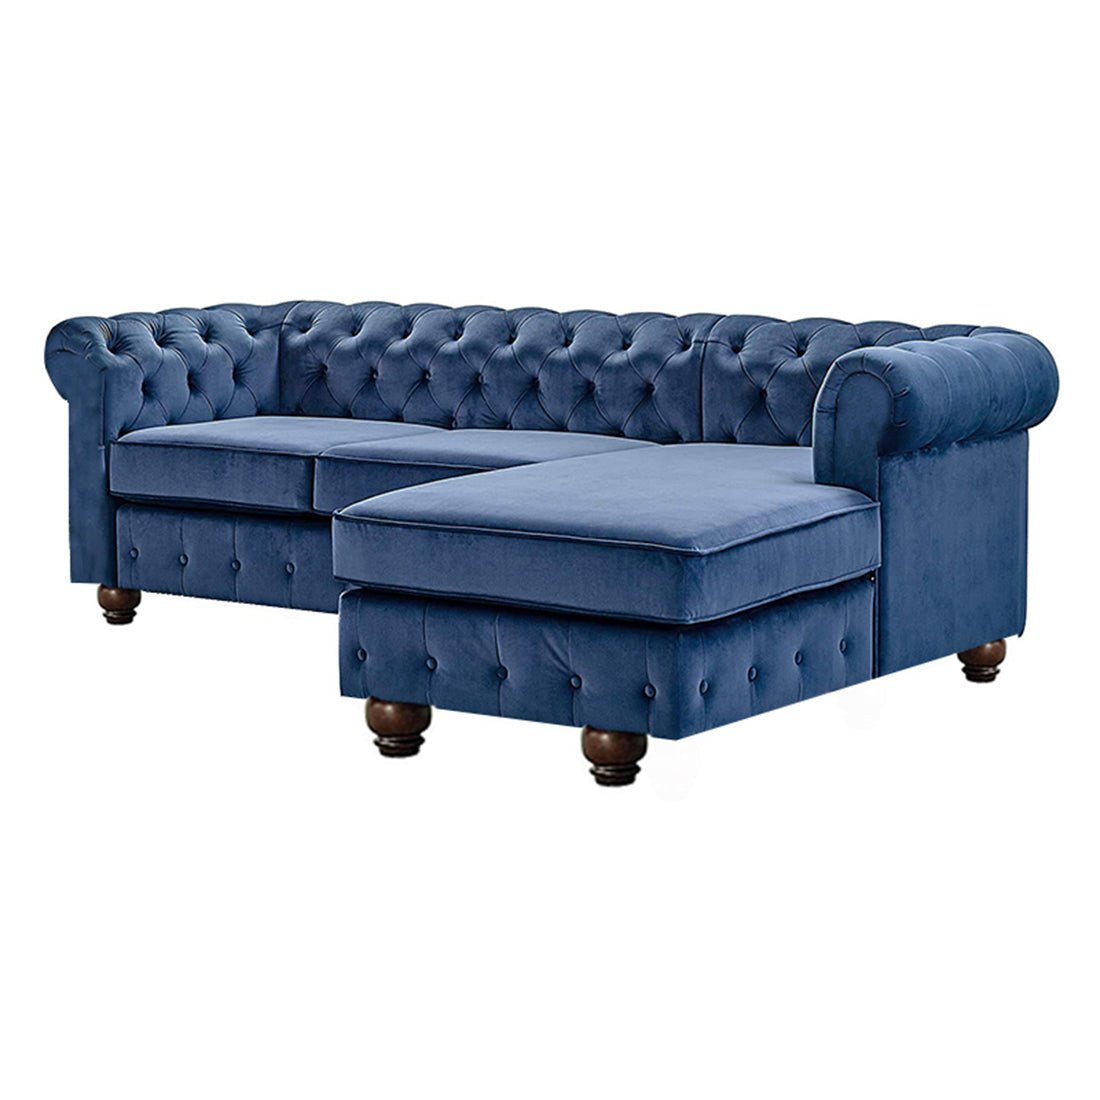 Torque India Eureka Solid Wood 4 Seater L Shape Fabric Chesterfield Sofa For Living - Blue - Torque India